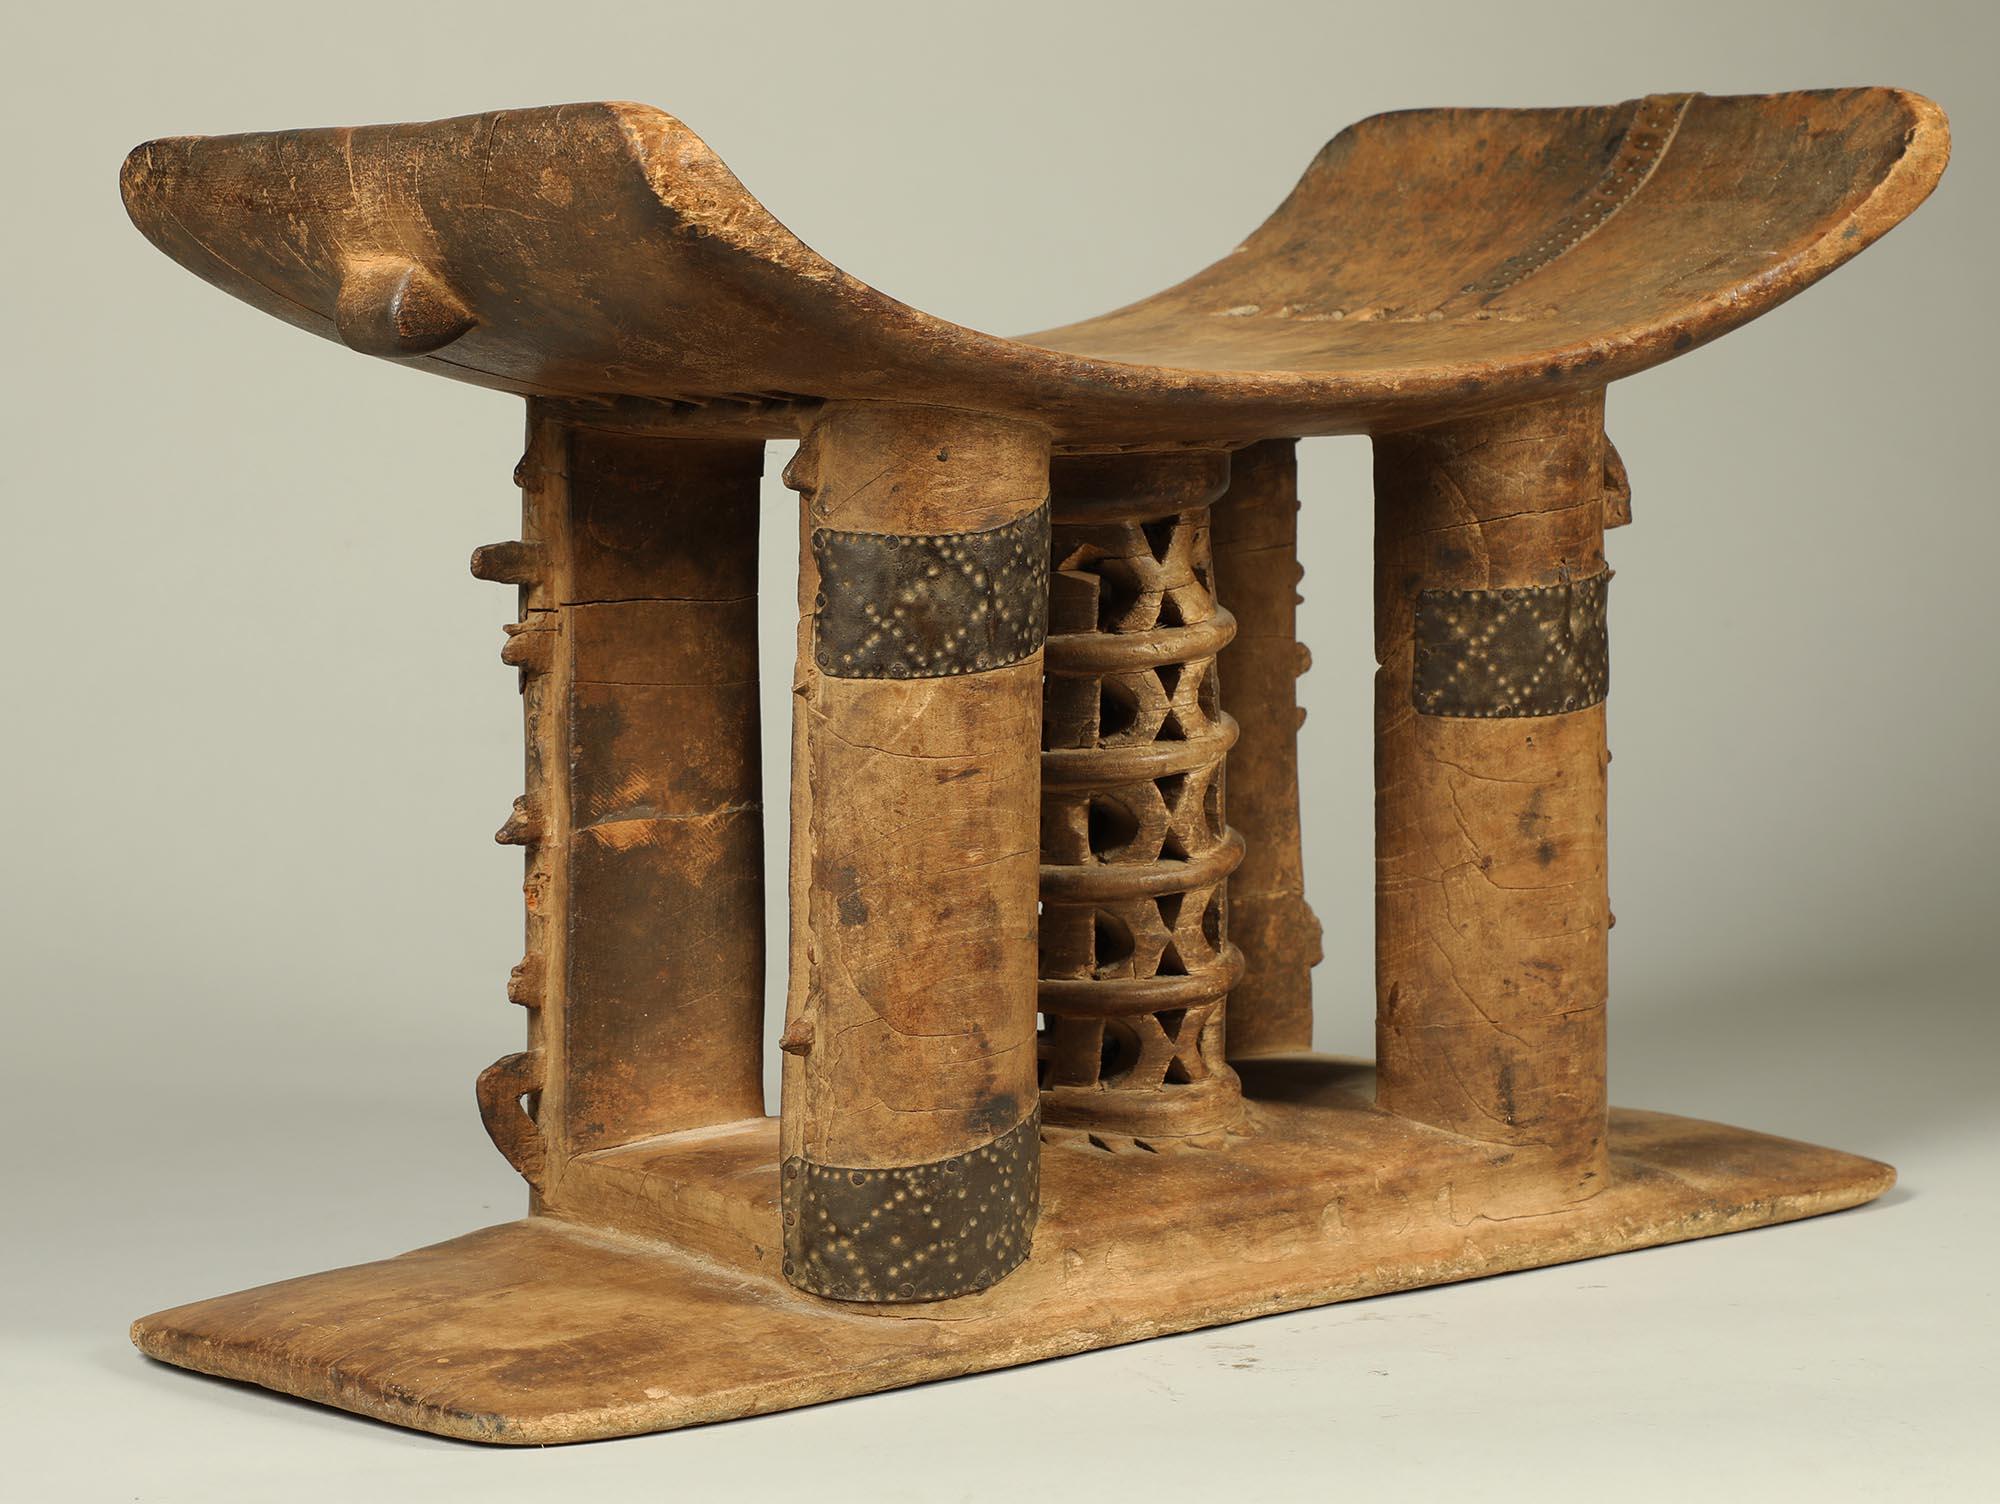 The stool was loved by its owner, repaired in several places with decorated metal straps. It has an openwork, tiered lattice central post and four support posts. It has the older style tiered square cut out and wide cross hollow on the underside